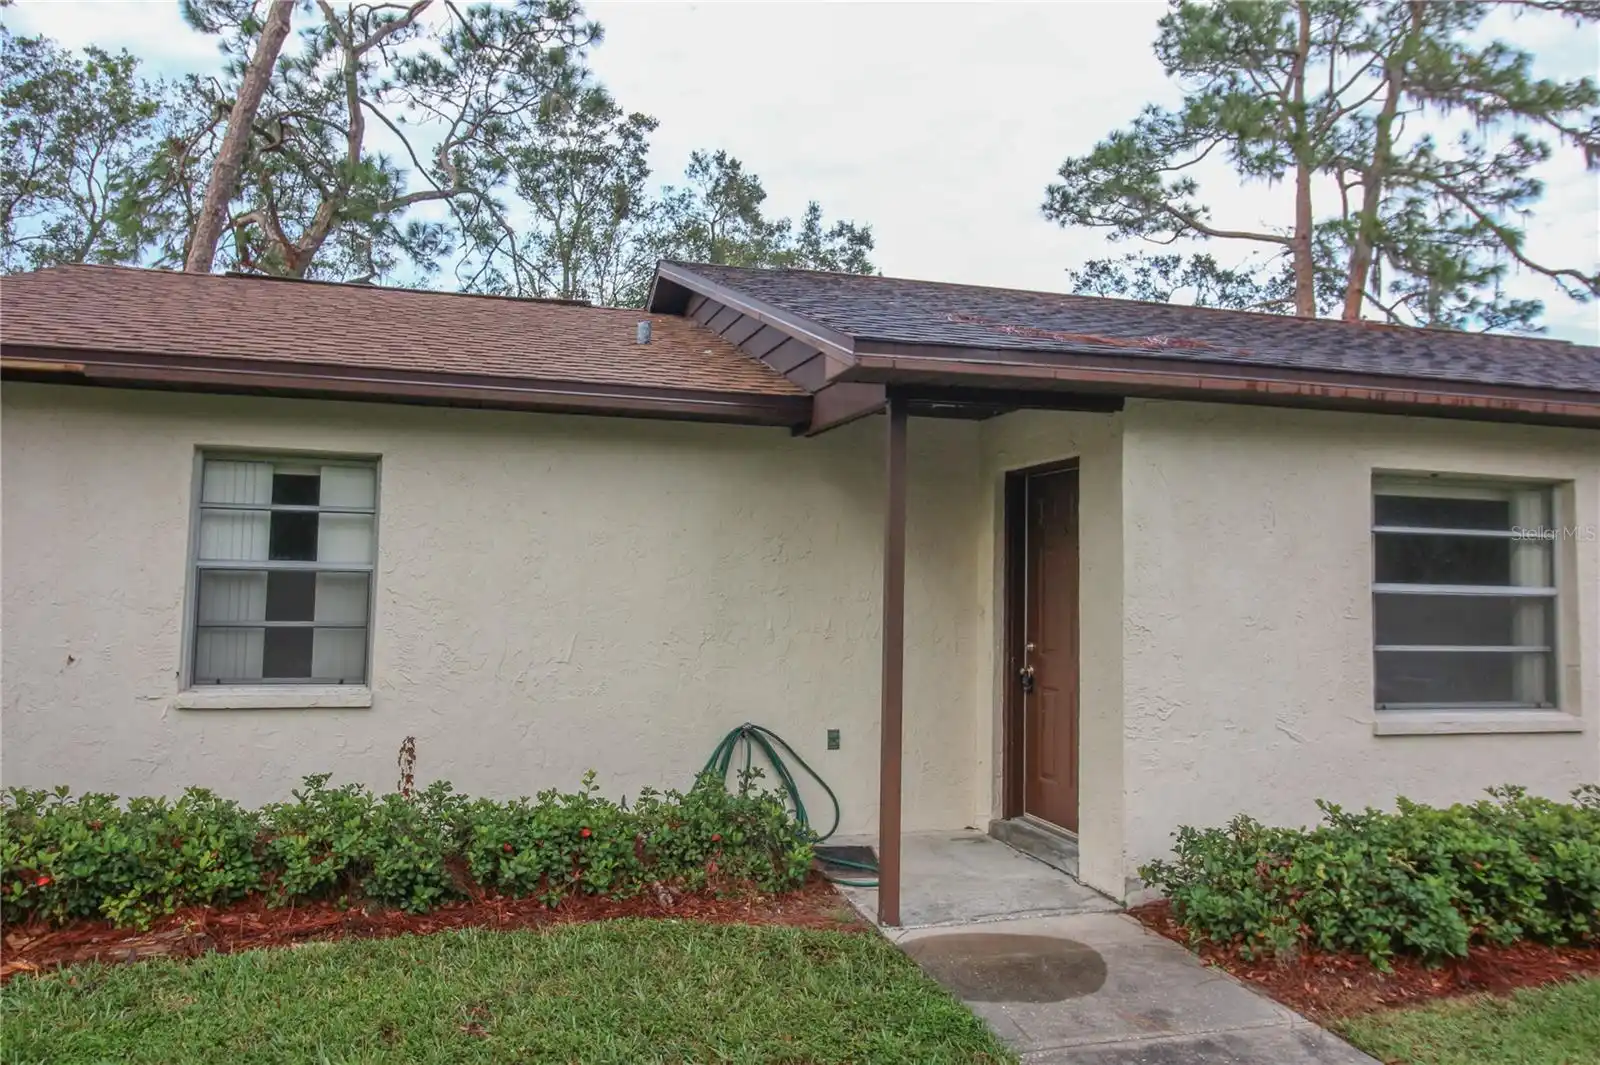 2BR, Residential Lease, 1BA, $1,450
Read More